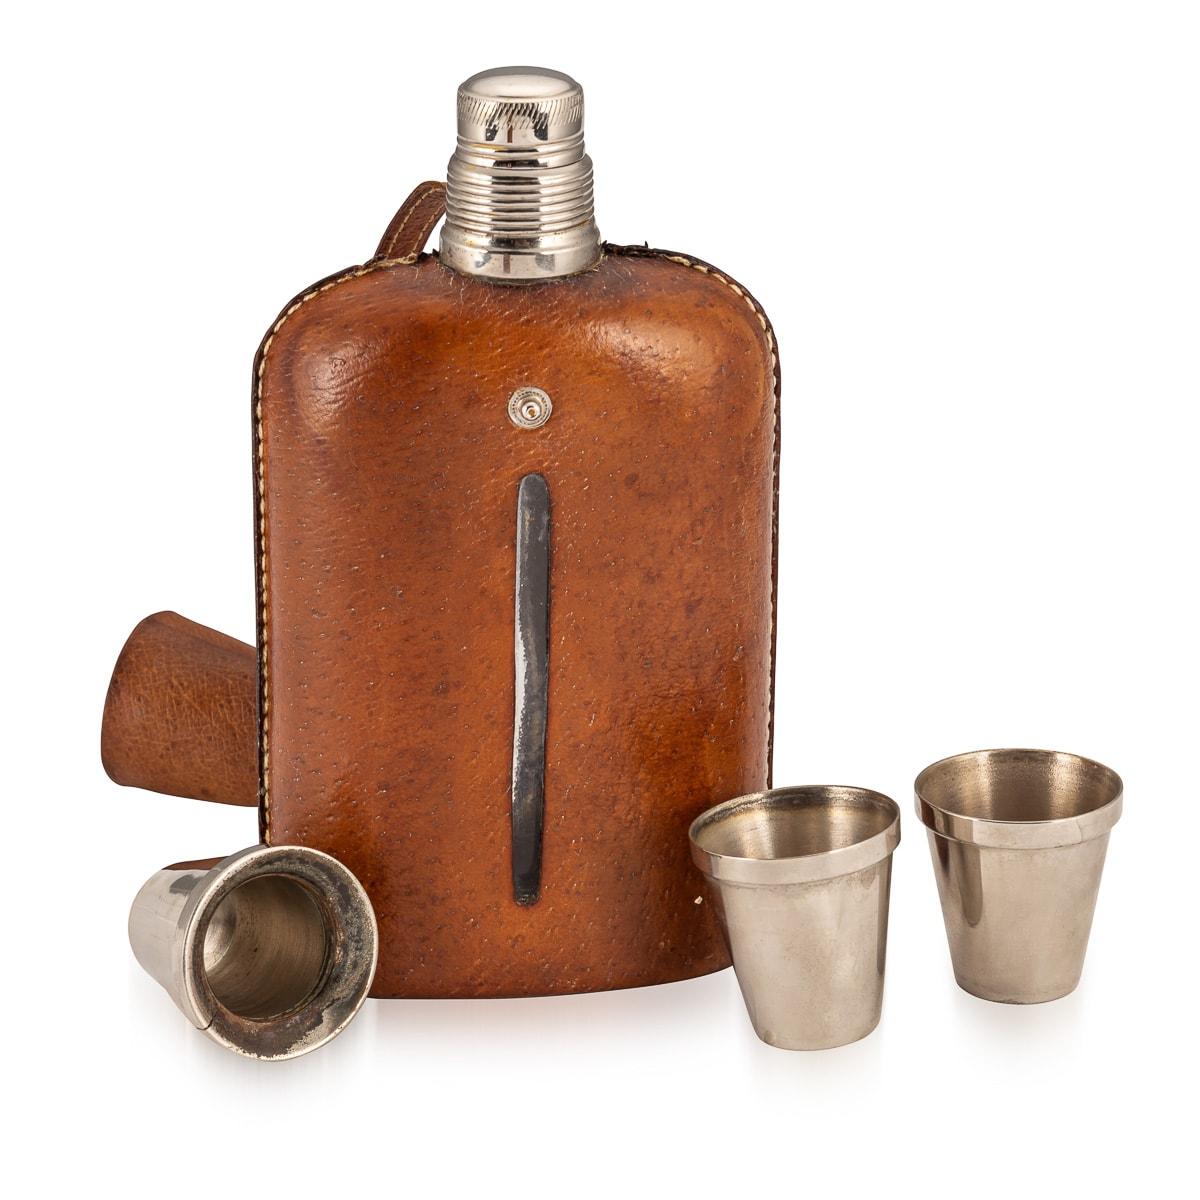 An attractive pair of hip flasks made in the early part of the 20th century. The graduated pair of glass flasks are clad in pig skin leather and two alloy cups are fastened down with a leather strap. Presented in very good condition, the charm,